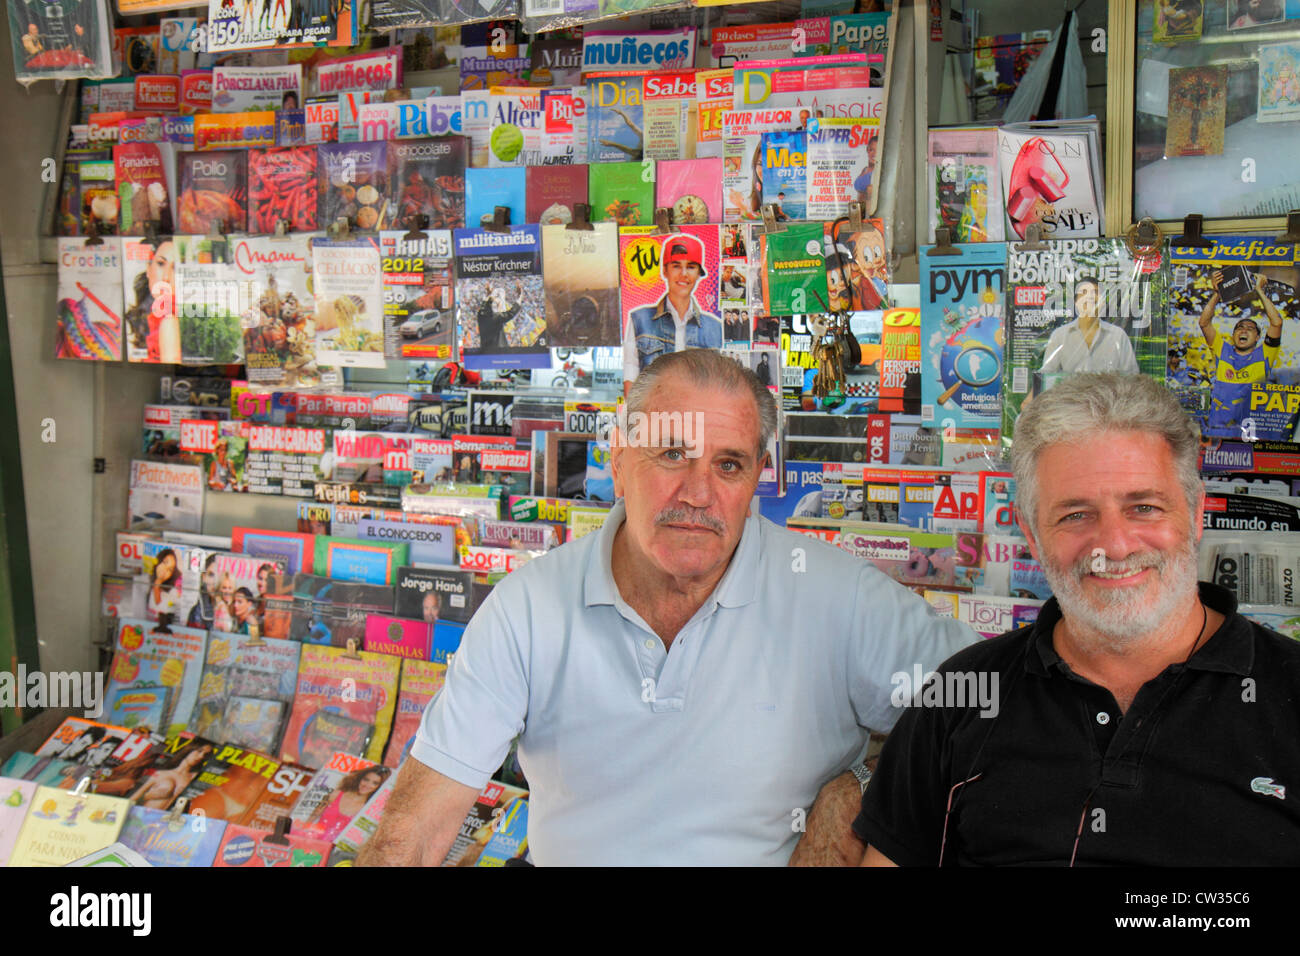 Buenos Aires Argentina,Avenida Rivadavia,kiosque,stall,magazines,Hispanic Ethnic man men male adultes,Work,employee worker Workers working staf Banque D'Images